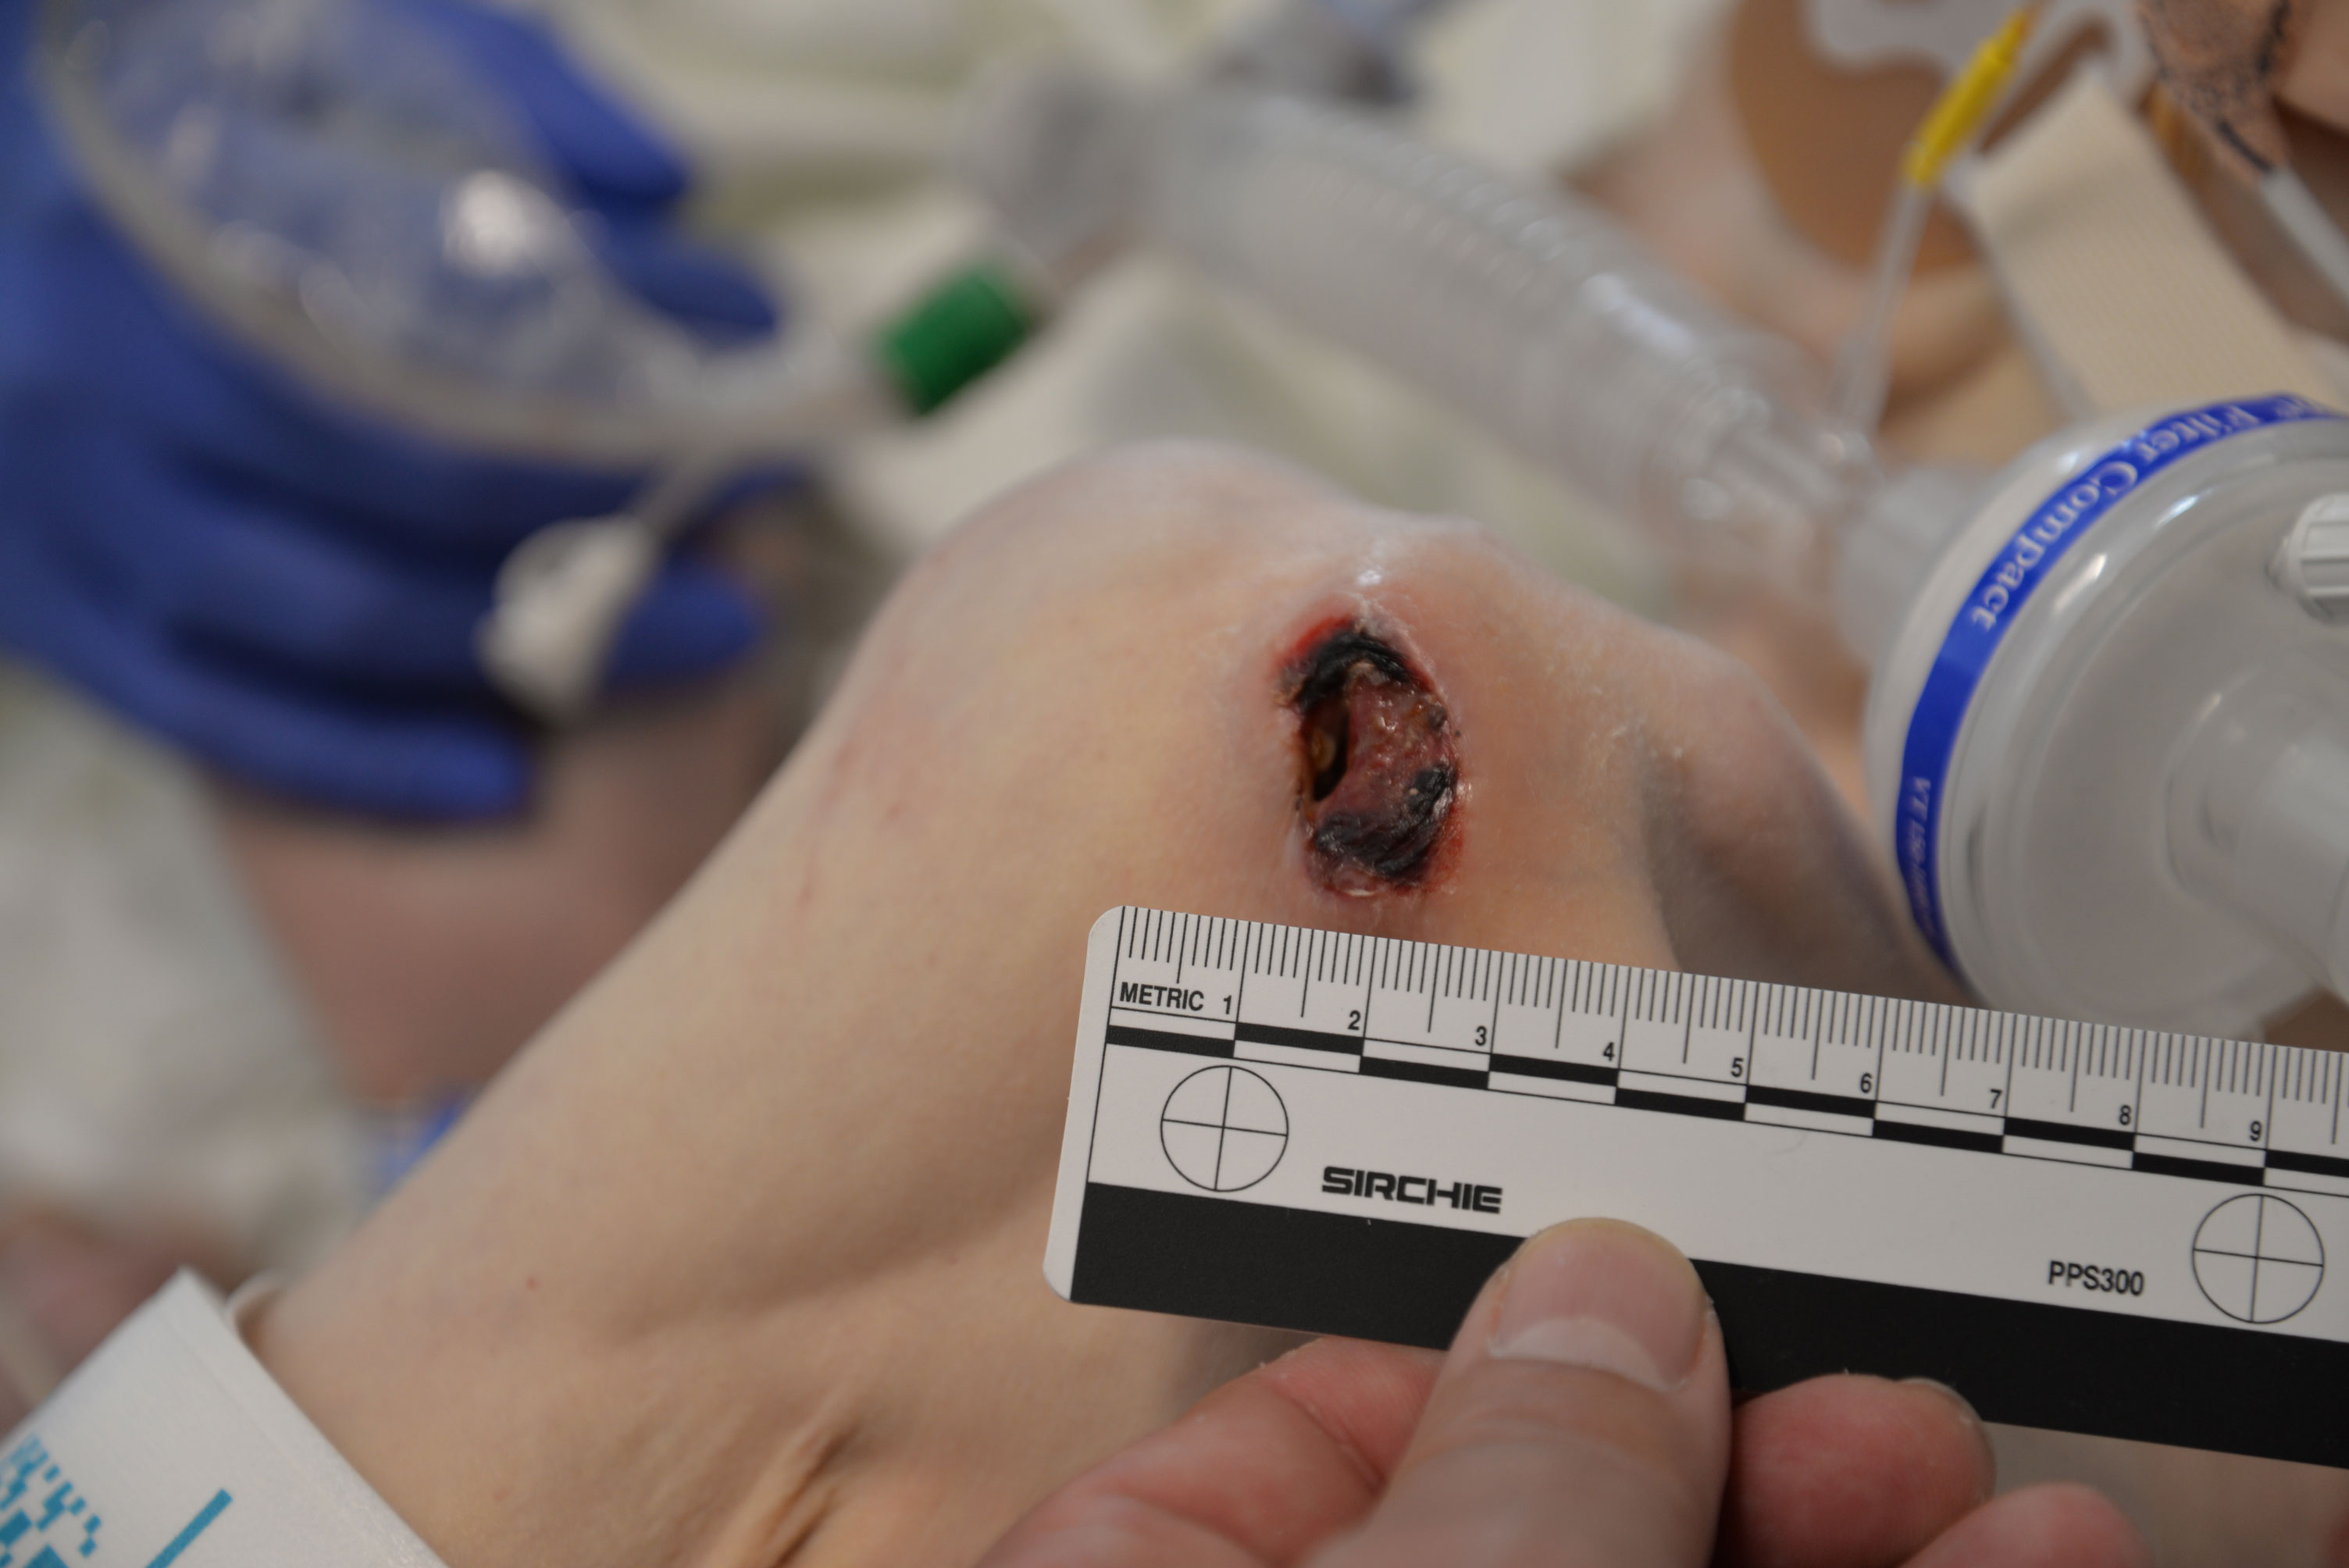 The foreground depicts a black-and-white ruler to the left of Aaron’s knee. The wound appears to be 2 cm in height and larger in width. The sore has mostly scabbed over, but for the center. Aaron’s kneecap is outlined against his pale skin and emaciated frame. Blue and white medical tubing is visible in the background. 